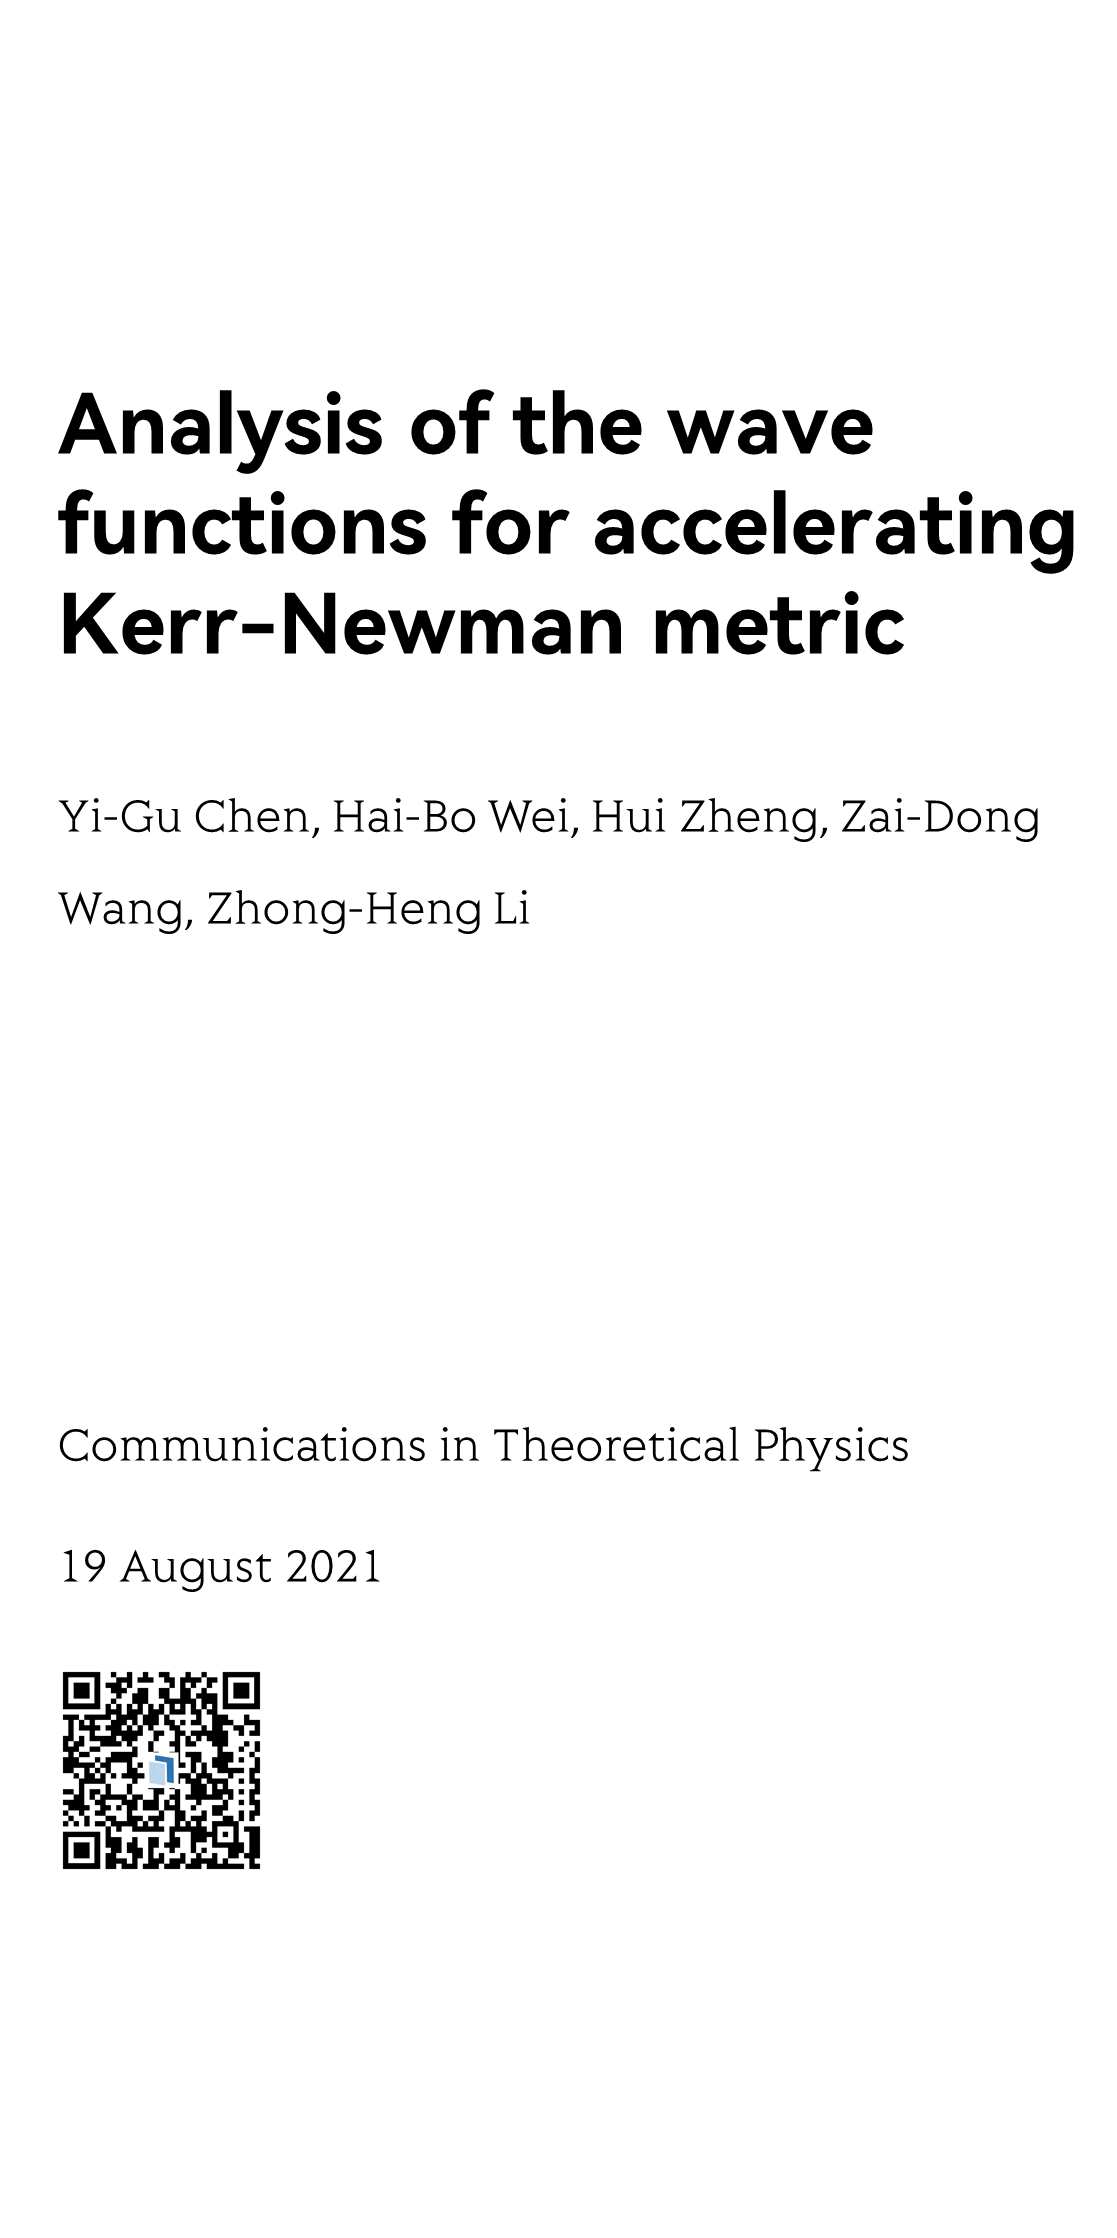 Analysis of the wave functions for accelerating Kerr-Newman metric_1